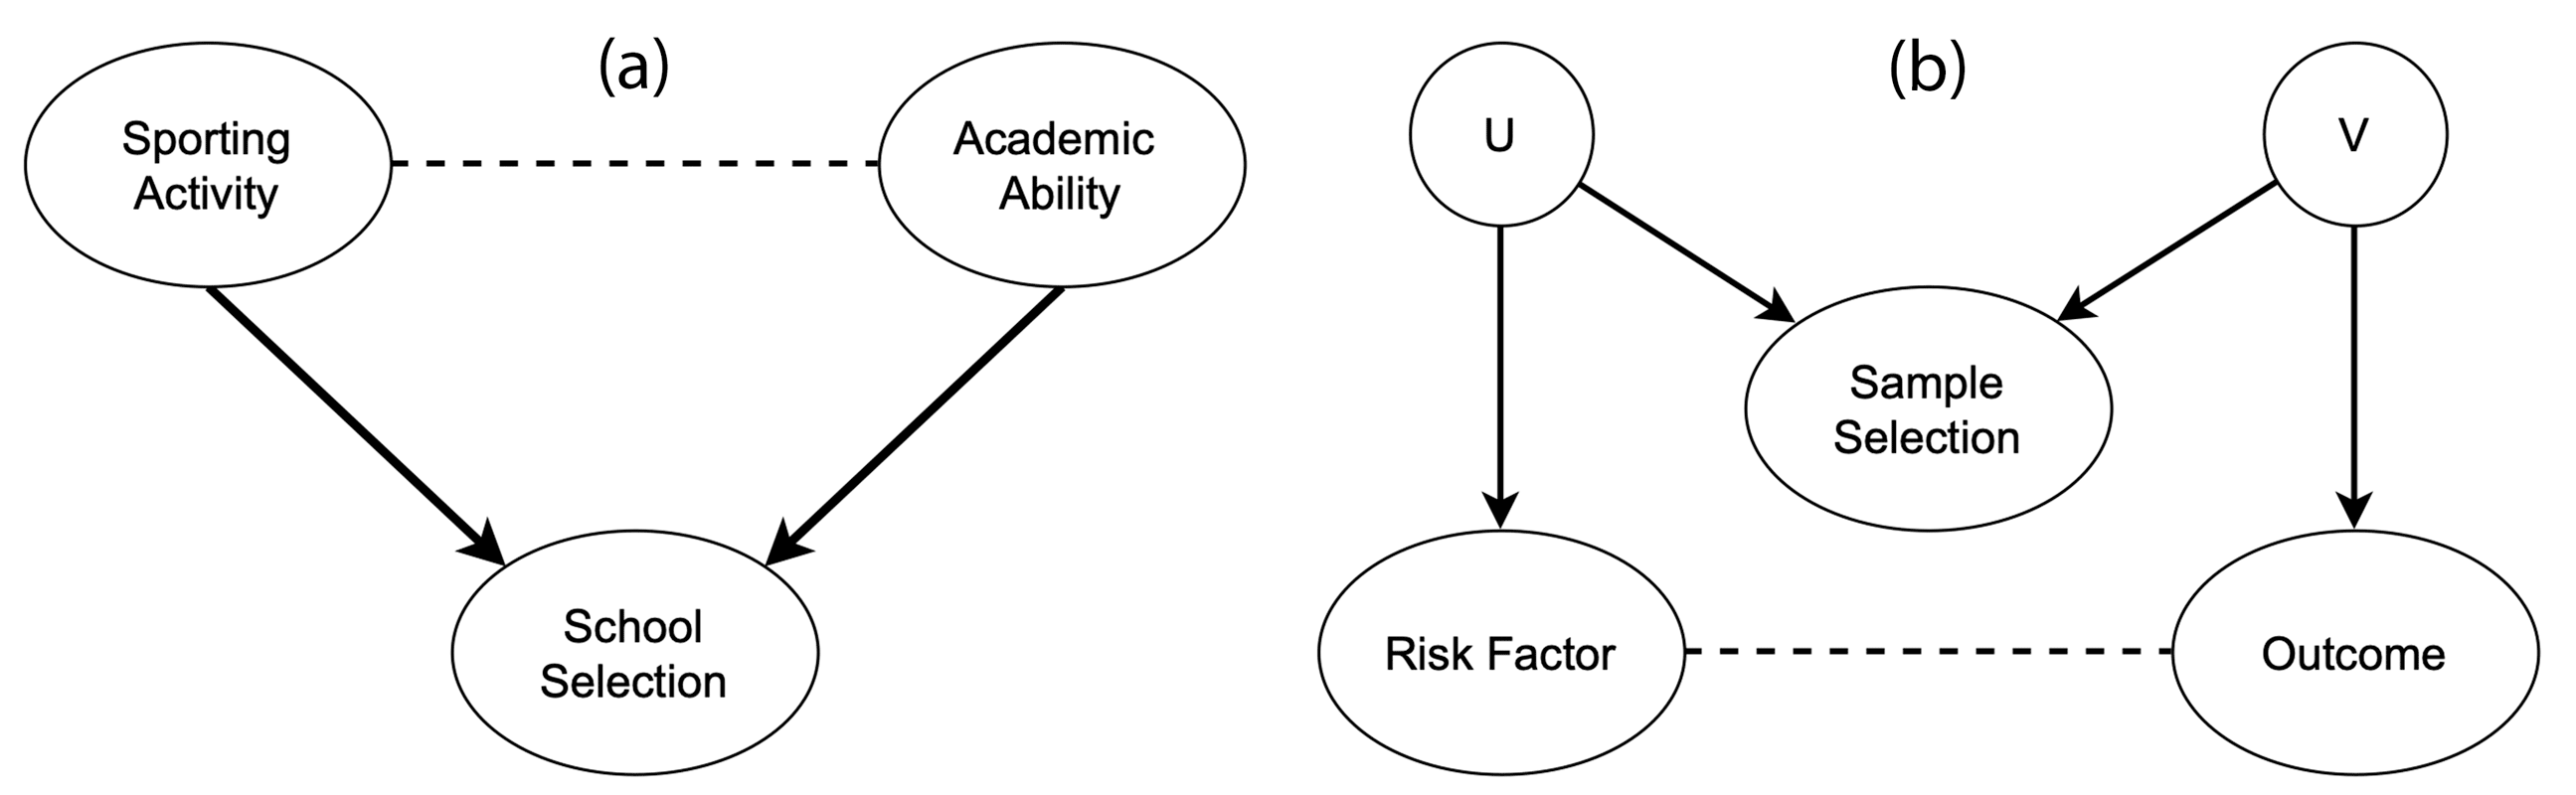 Directed arrows indicate causal effects and dotted lines indicate induced associations. (a) shows a scenario in which collider bias could distort the estimate of the causal effect of sporting activity on the academic ability. As shown in (b), the relation between the two associated variables can be indirect, with the risk factor and the outcome being indirectly associated with sample selection through unmeasured confounding variables (U and V).